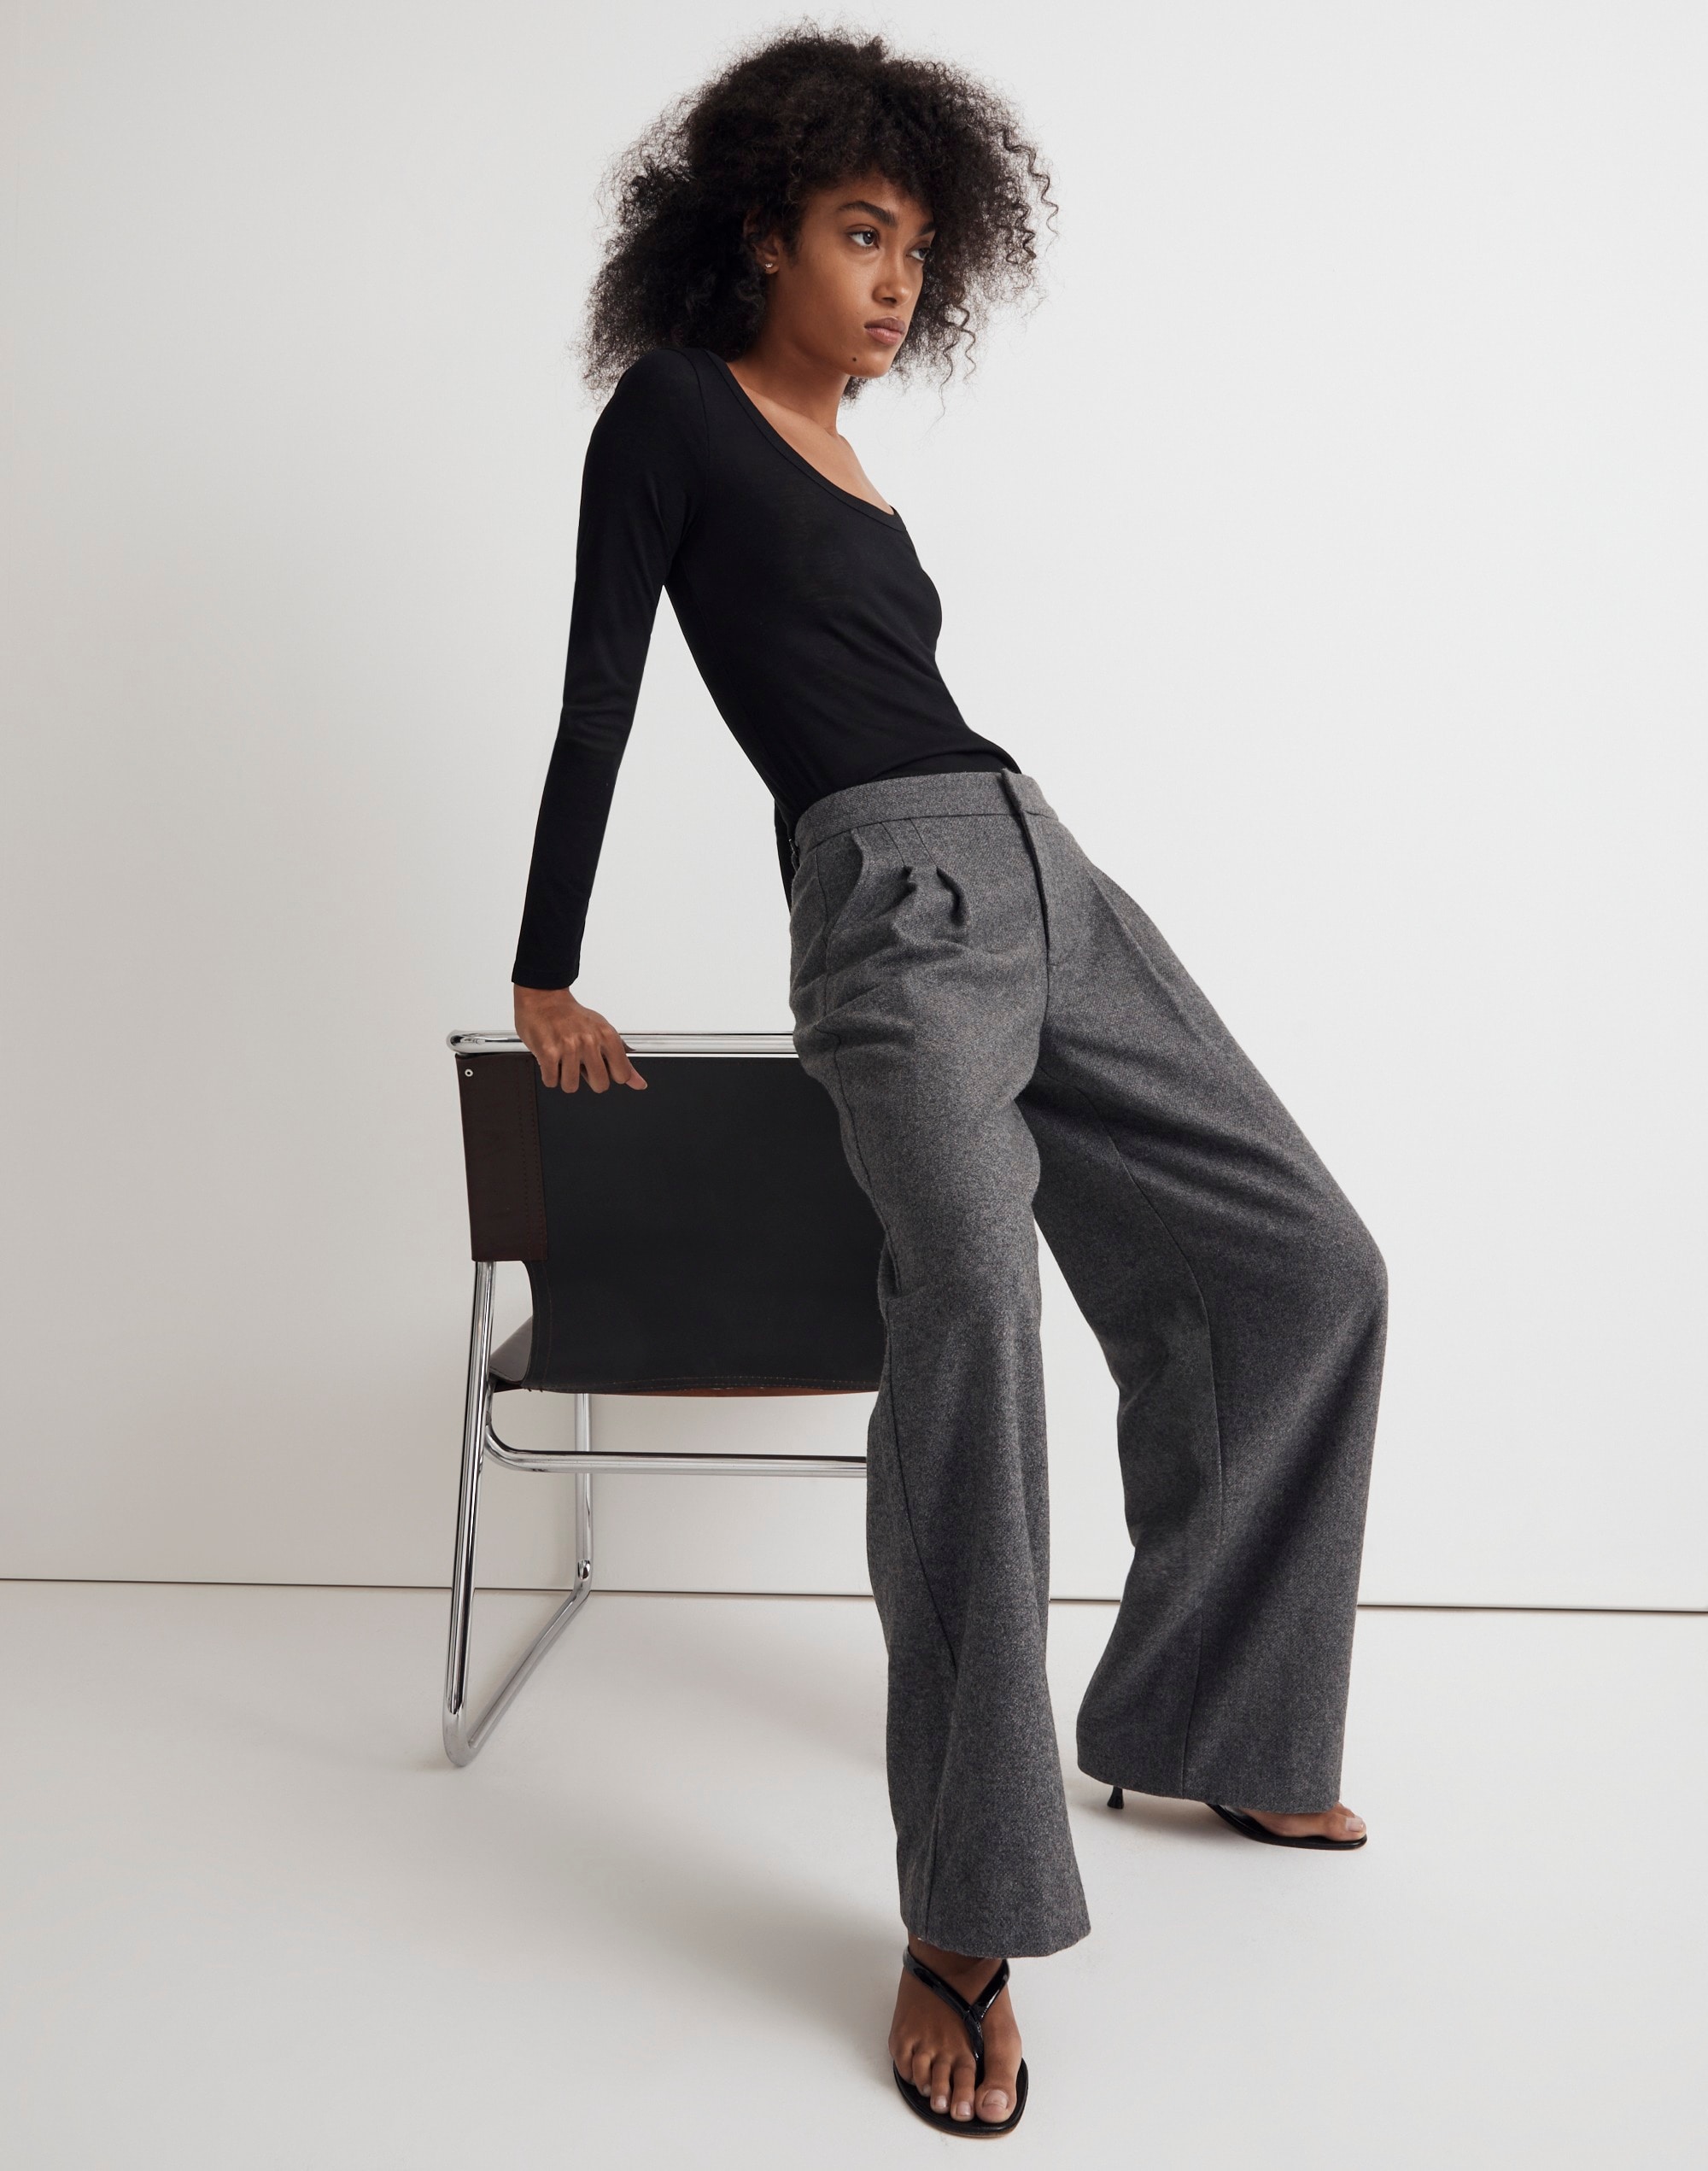 The Harlow Low-Slung Wide-Leg Pant